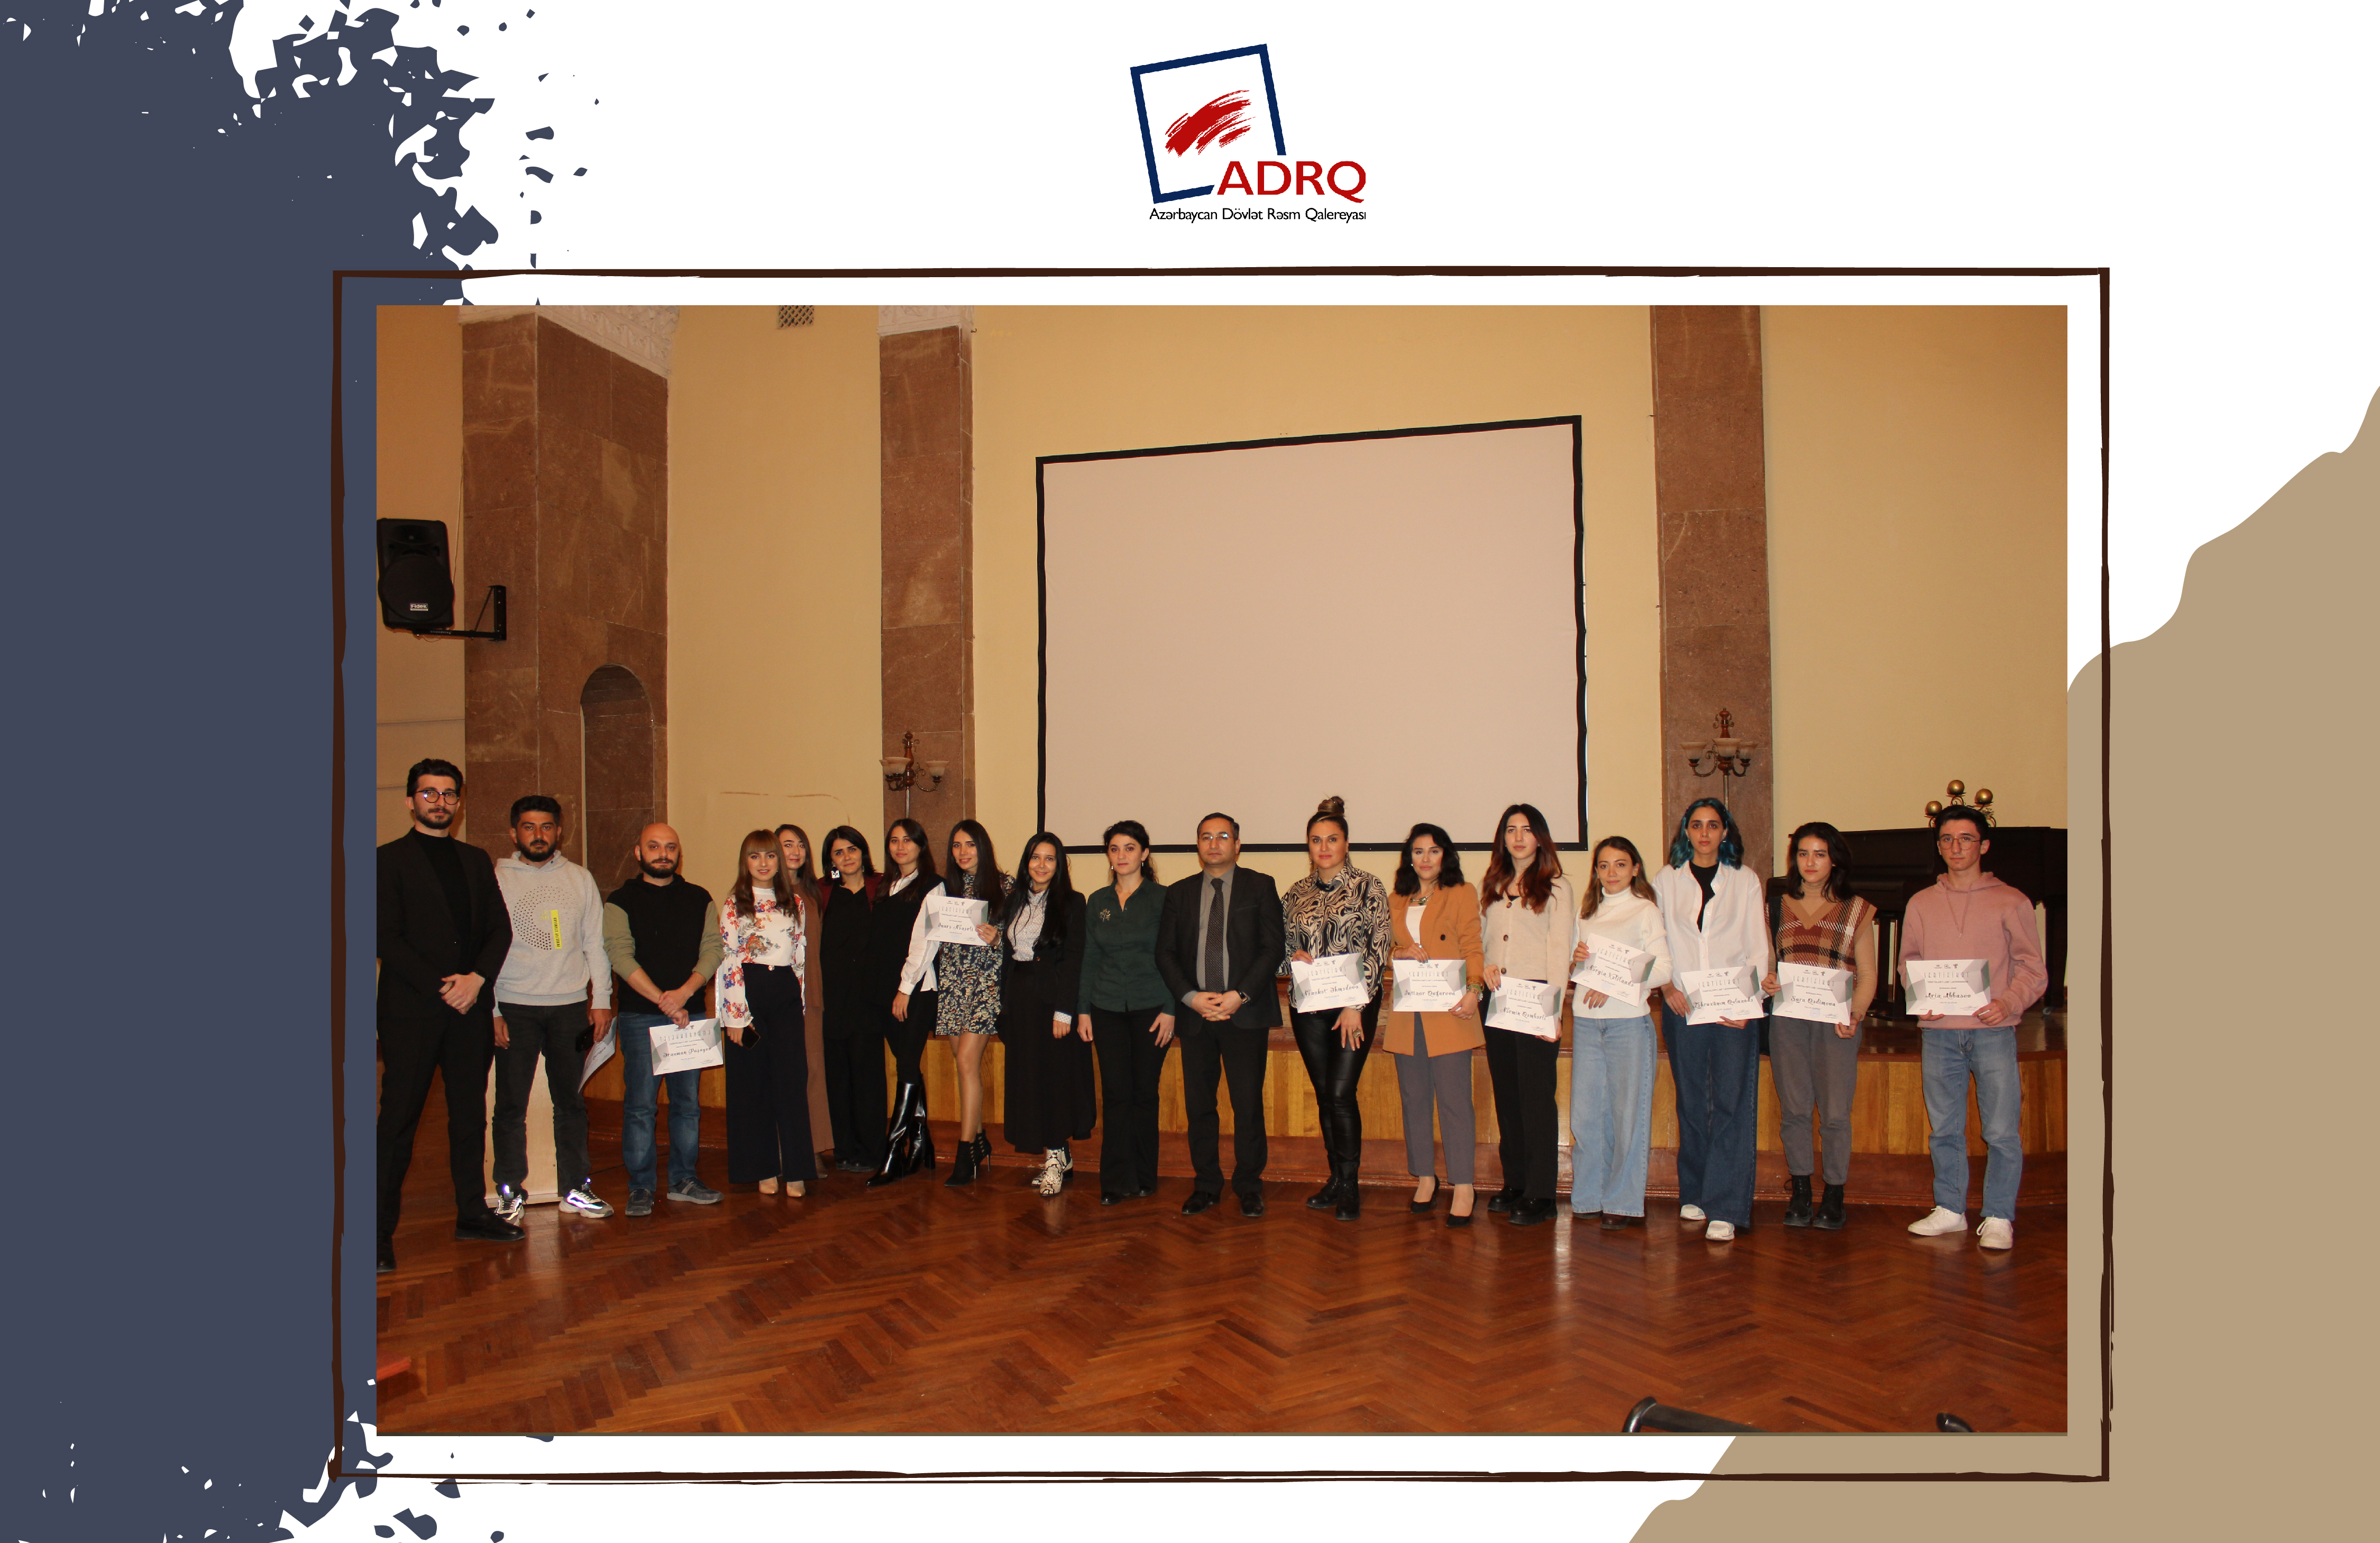 An exhibition and award ceremony of the Digitalart-lab of participants took place